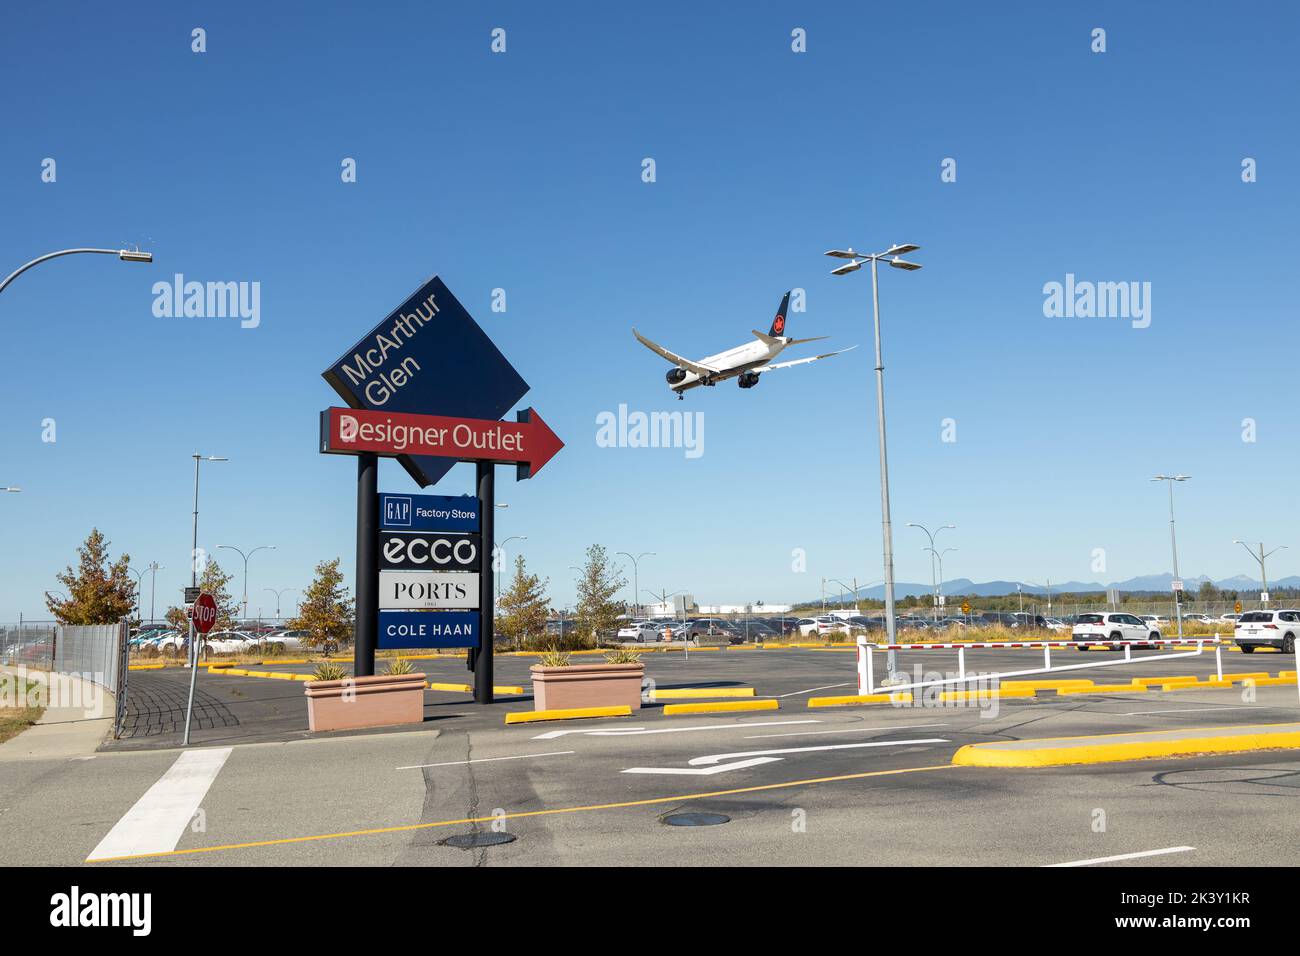 Vancouver, Canada - September 25, 2022: View of sign McArthur Glen Designer Outlet with landing plane in the background Stock Photo